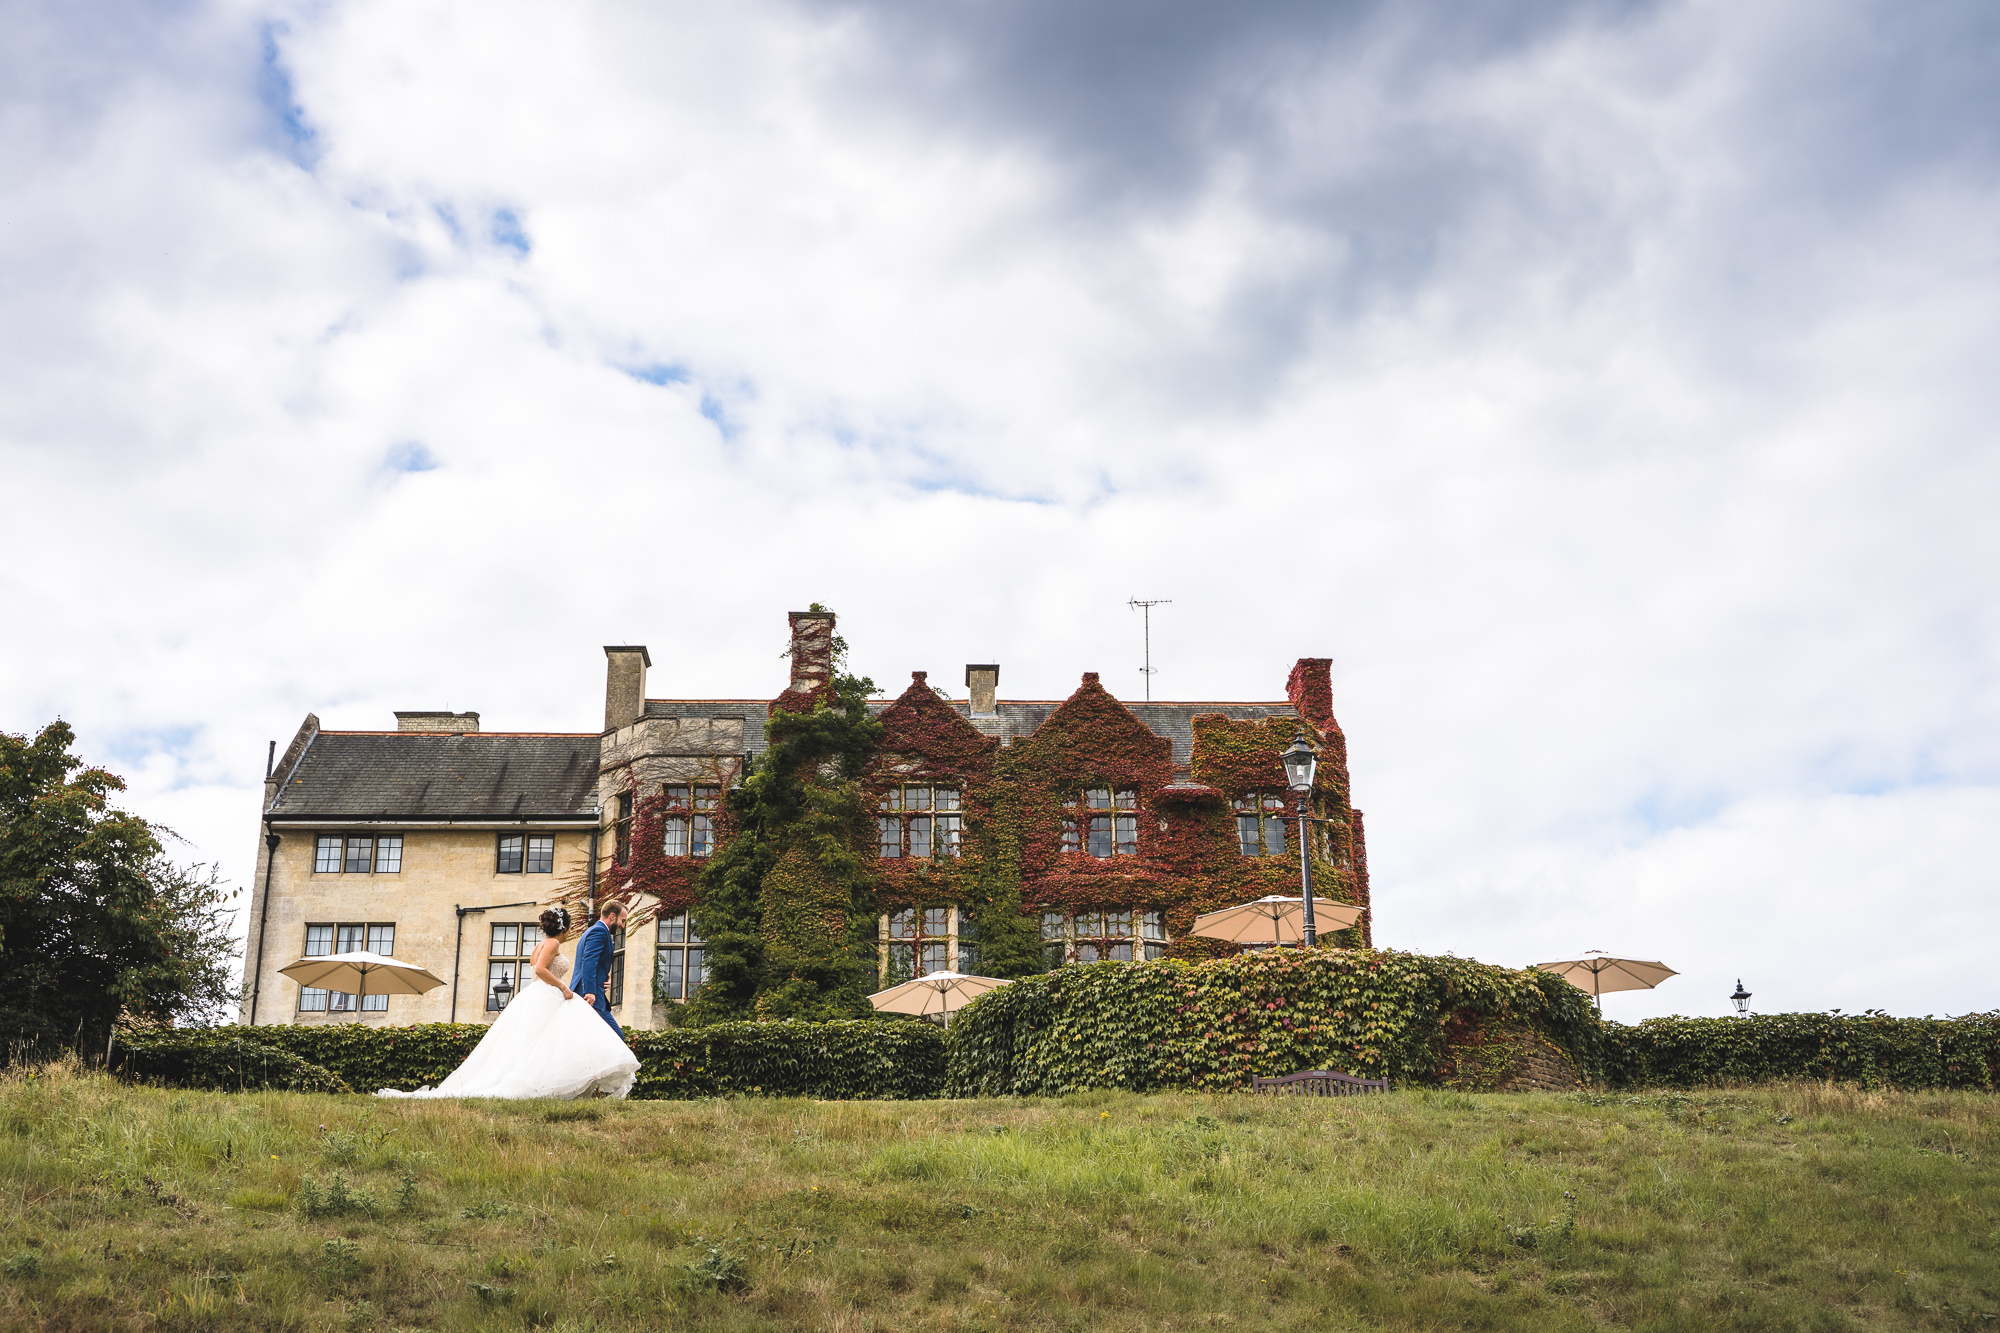 An intimate micro wedding at Pennyhill Park.